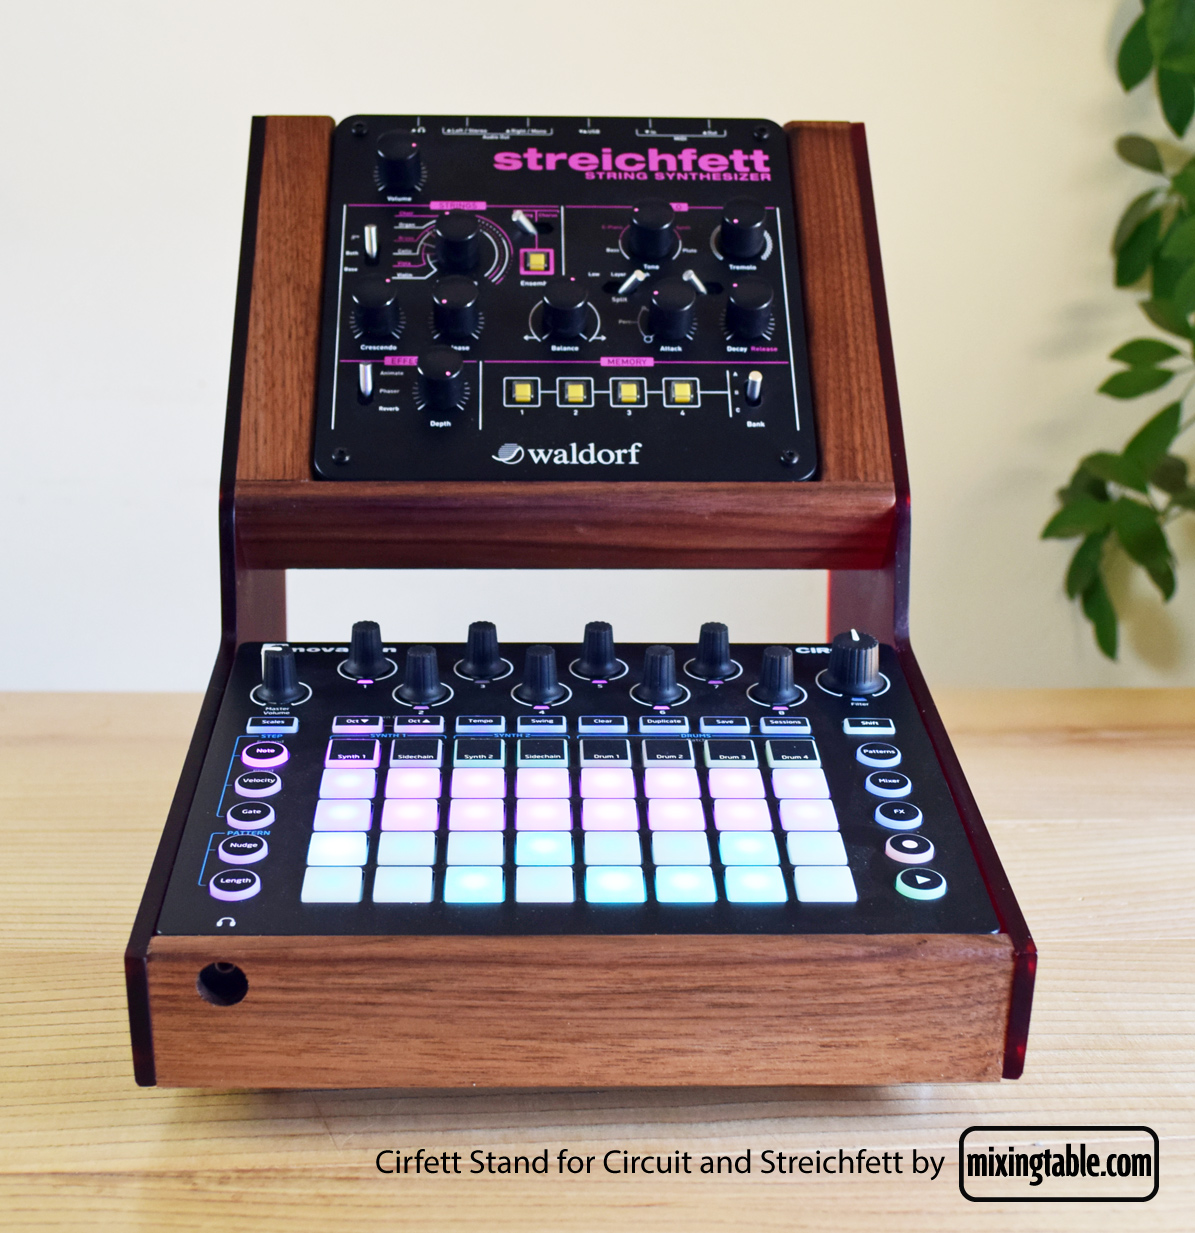 cirfett-stand-by-mixingtable